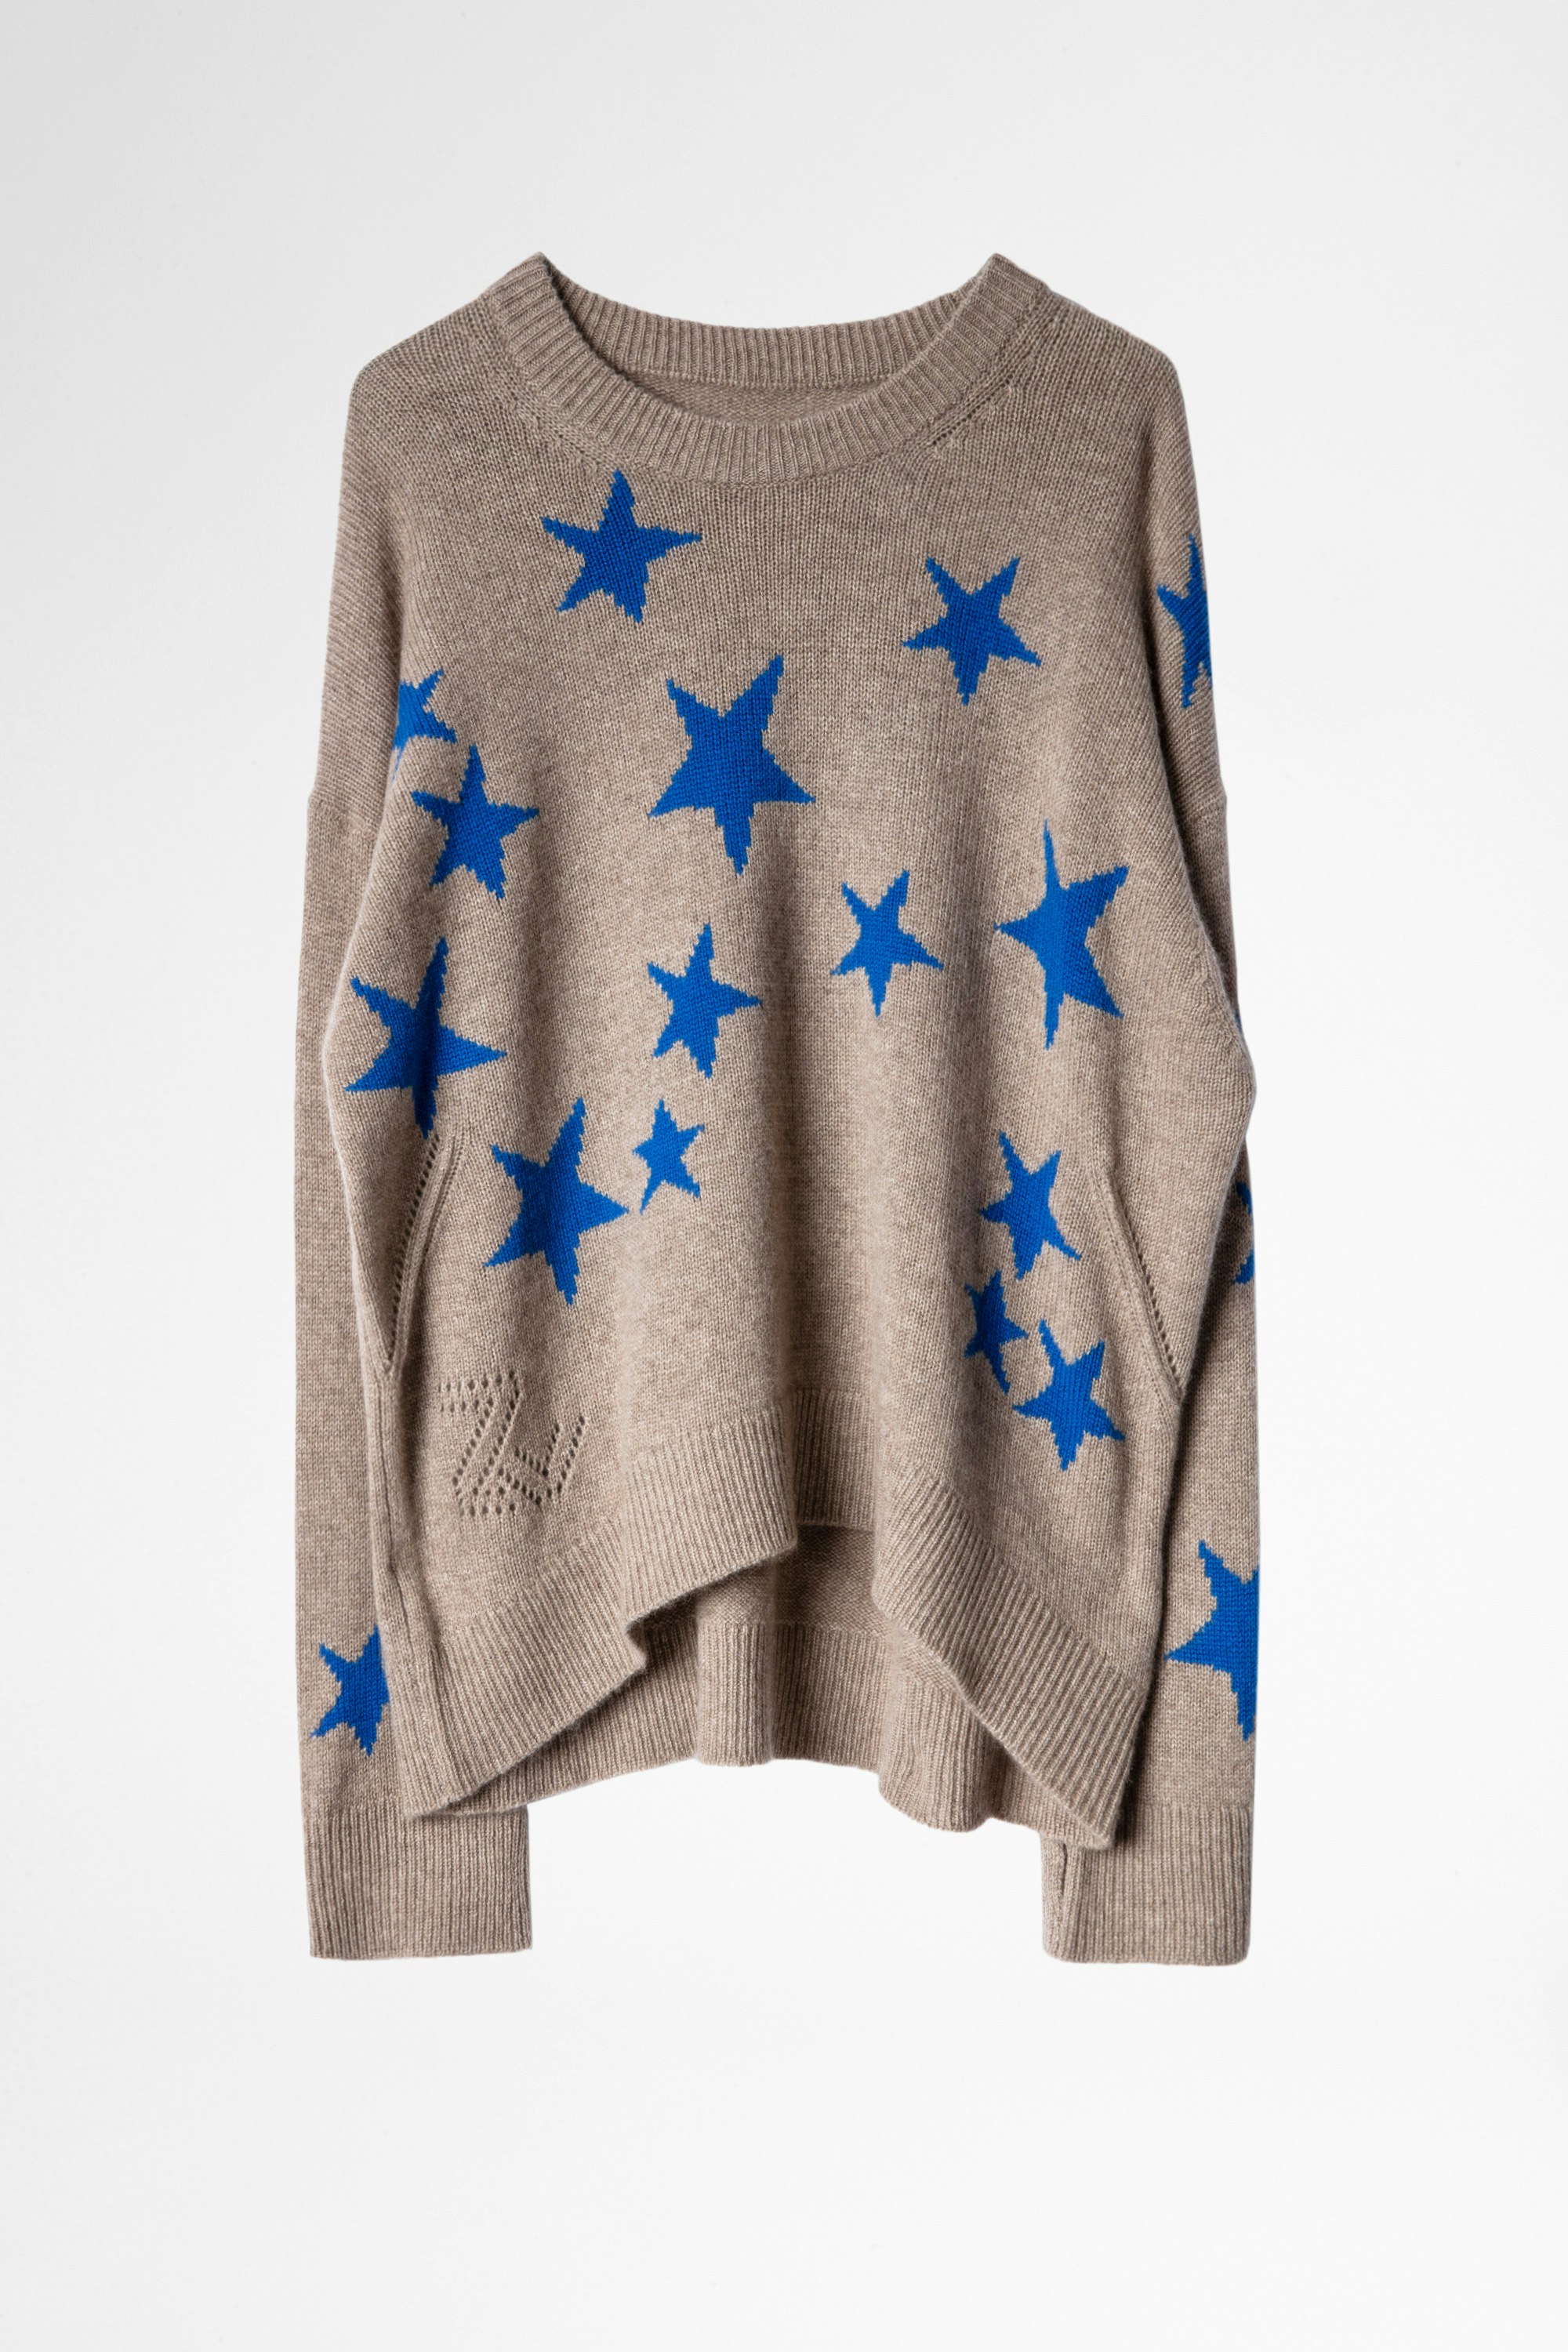 Markus Cashmere Sweater Women's cappuccino cashmere sweater with star pattern